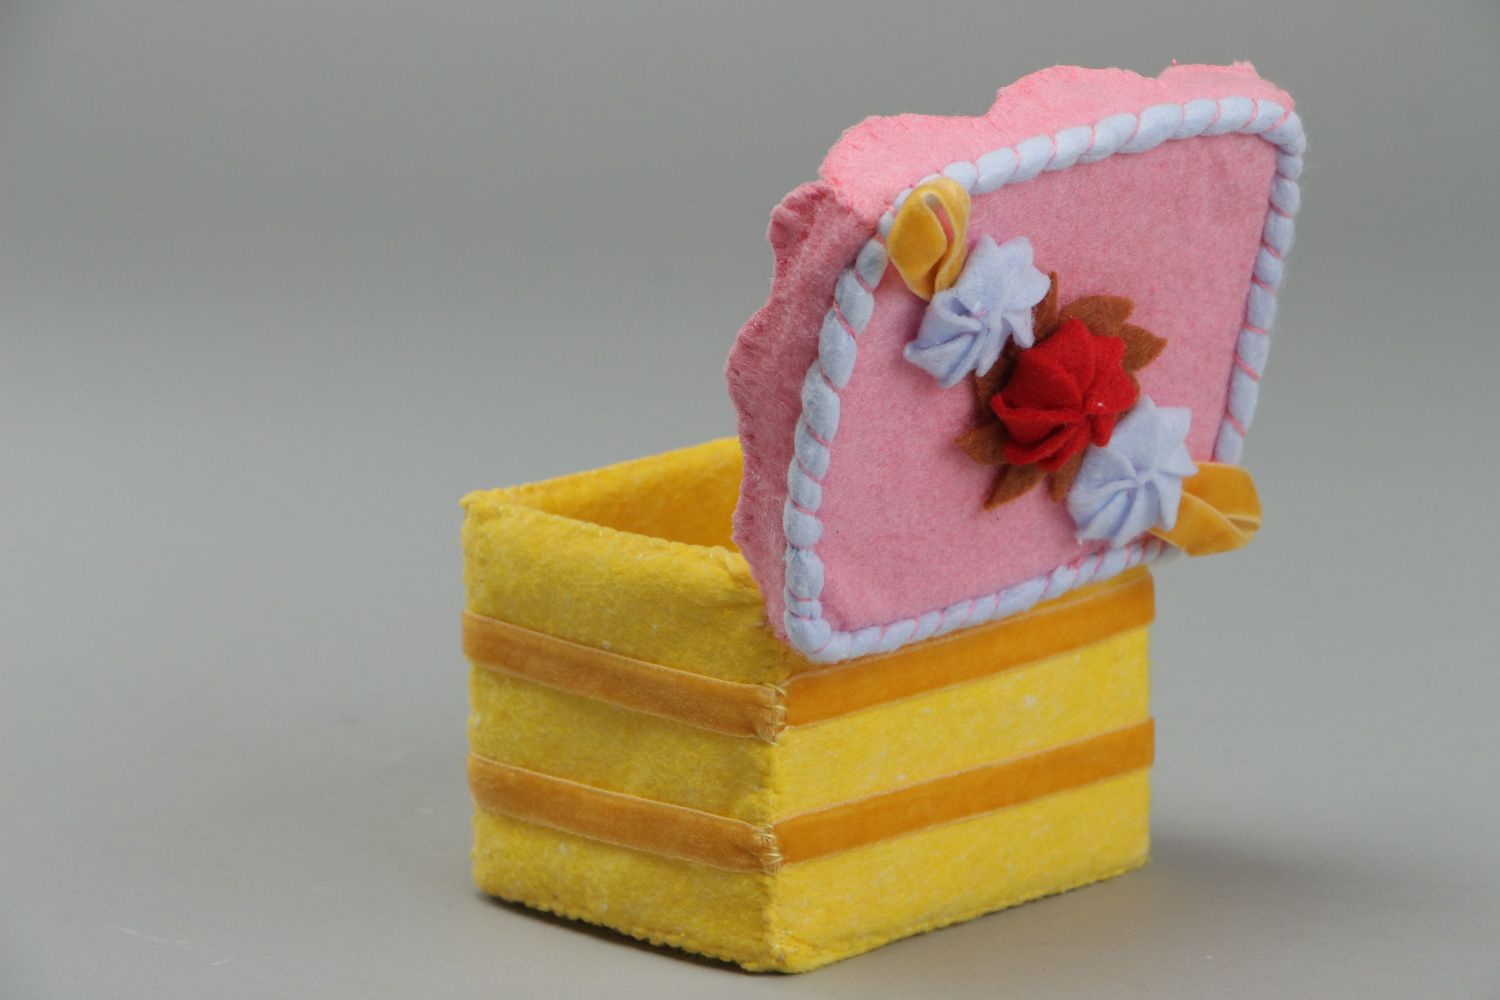 Handmade children's colorful jewelry box made of felt in the shape of a cake photo 3